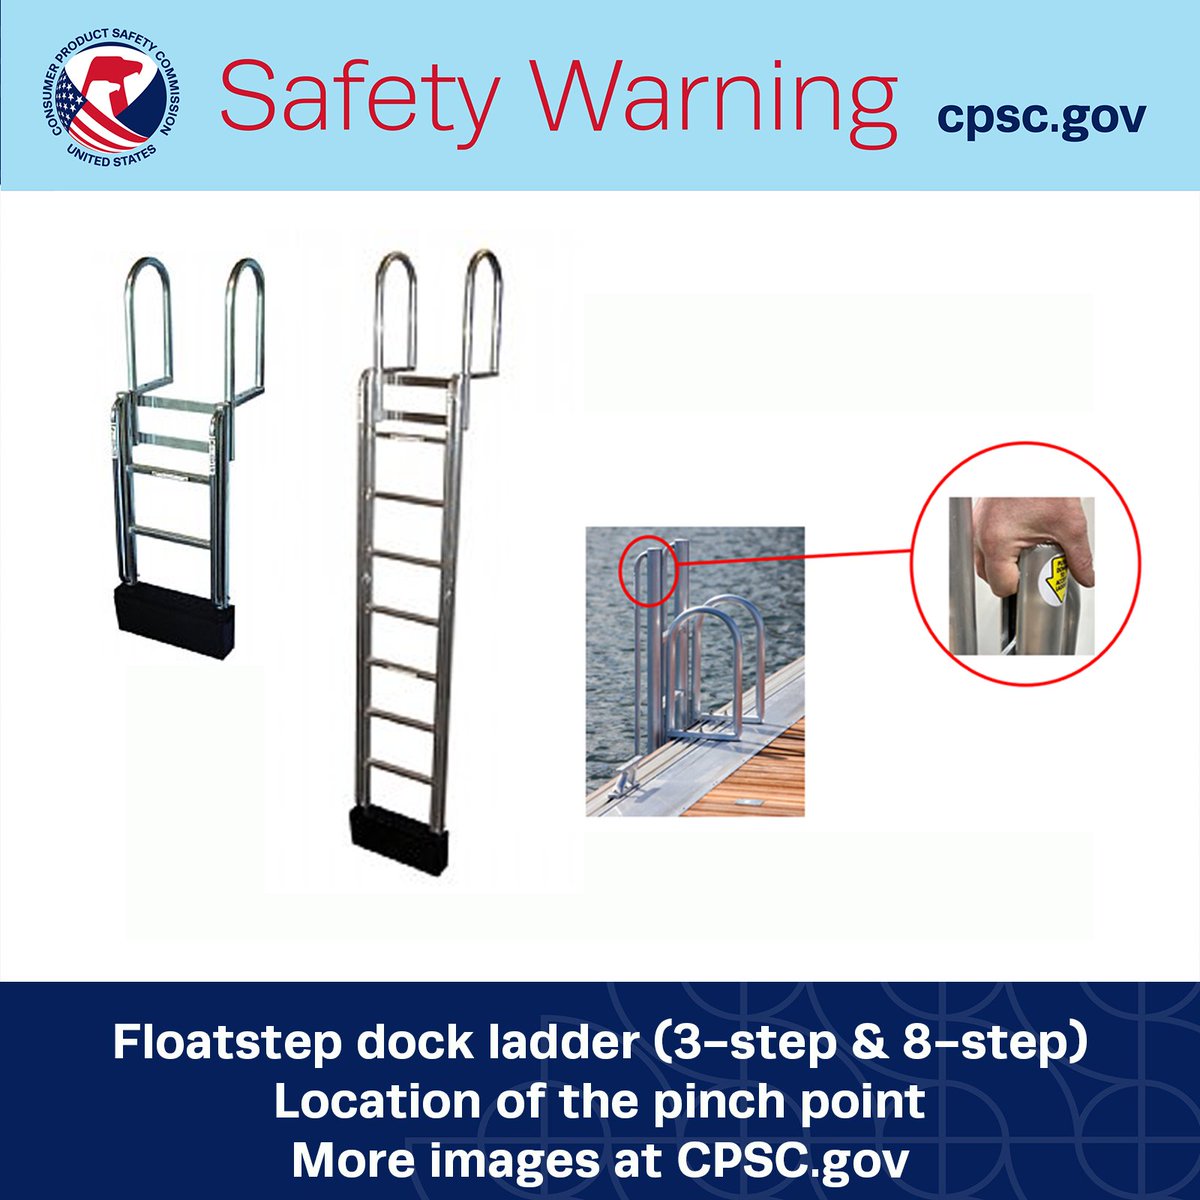 #WARNING: @USCPSC warns consumers to immediately stop using Floatstep Dock Ladders due to risk of fingertip amputation and crushing injuries; Manufactured by Atlantic Aluminum and Marine Products Full release: cpsc.gov/Newsroom/News-…